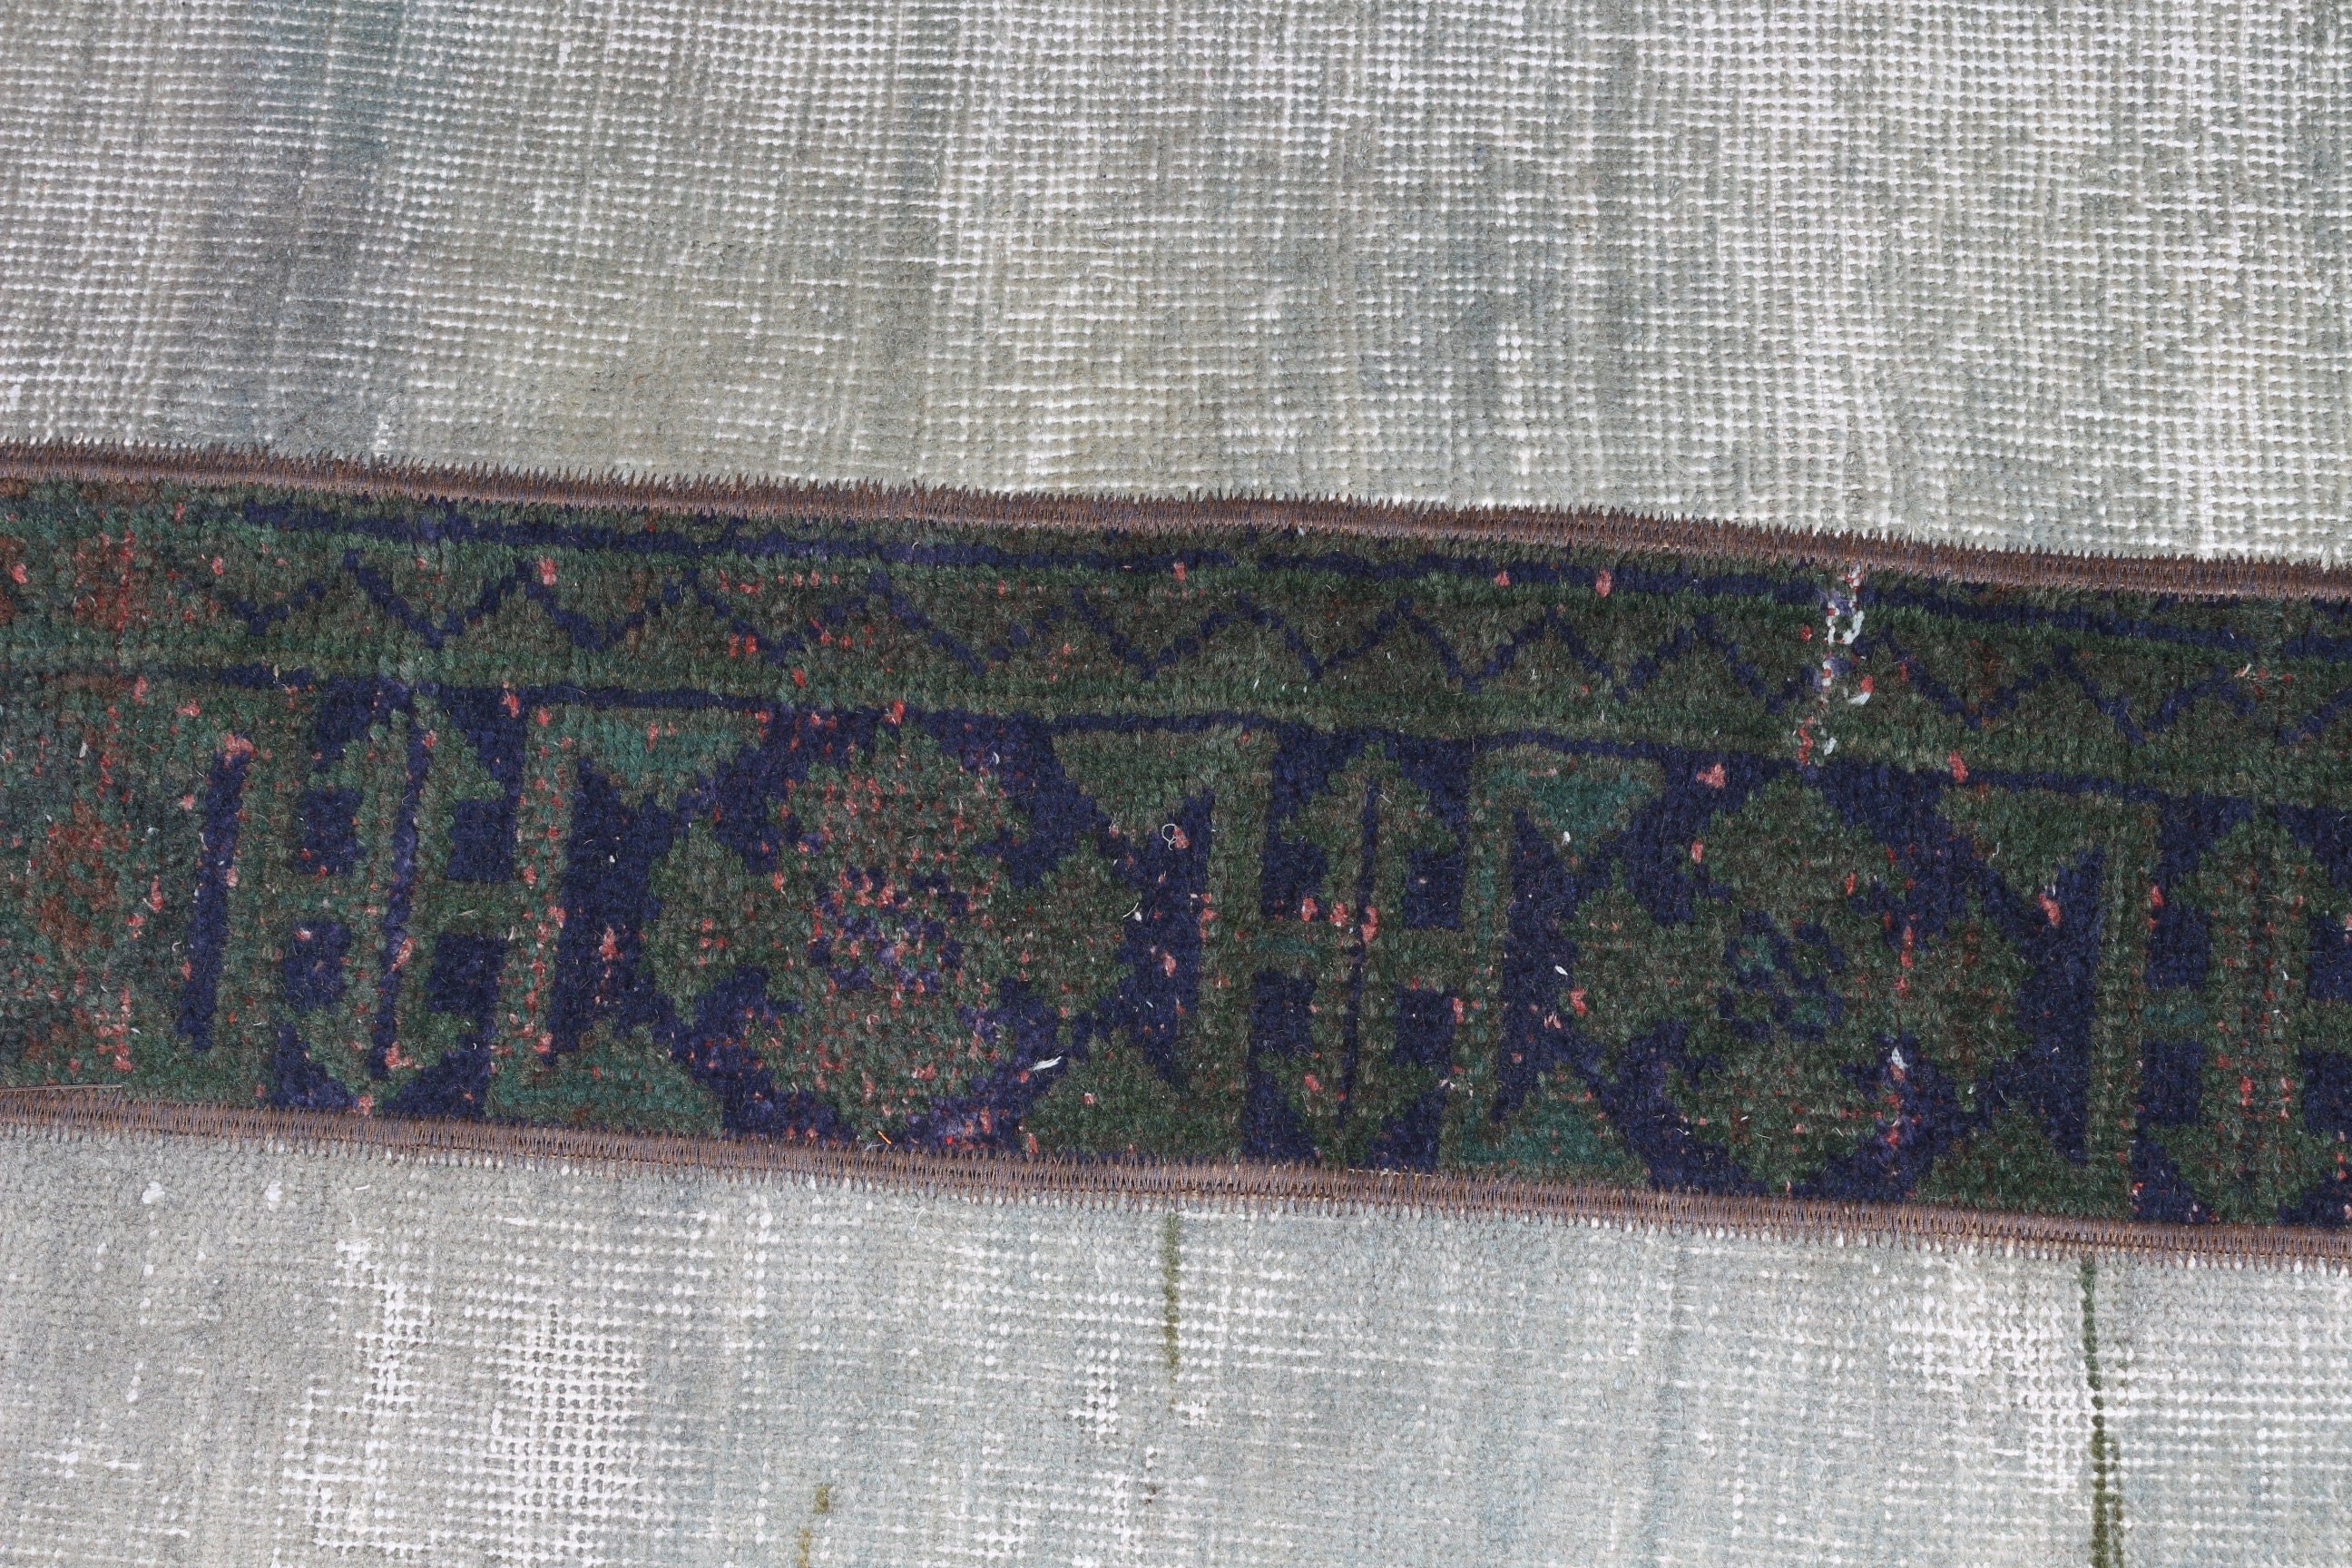 Green Moroccan Rugs, 1.9x3 ft Small Rugs, Rugs for Bath, Turkish Rugs, Cool Rugs, Oushak Rug, Wall Hanging Rugs, Vintage Rugs, Car Mat Rug